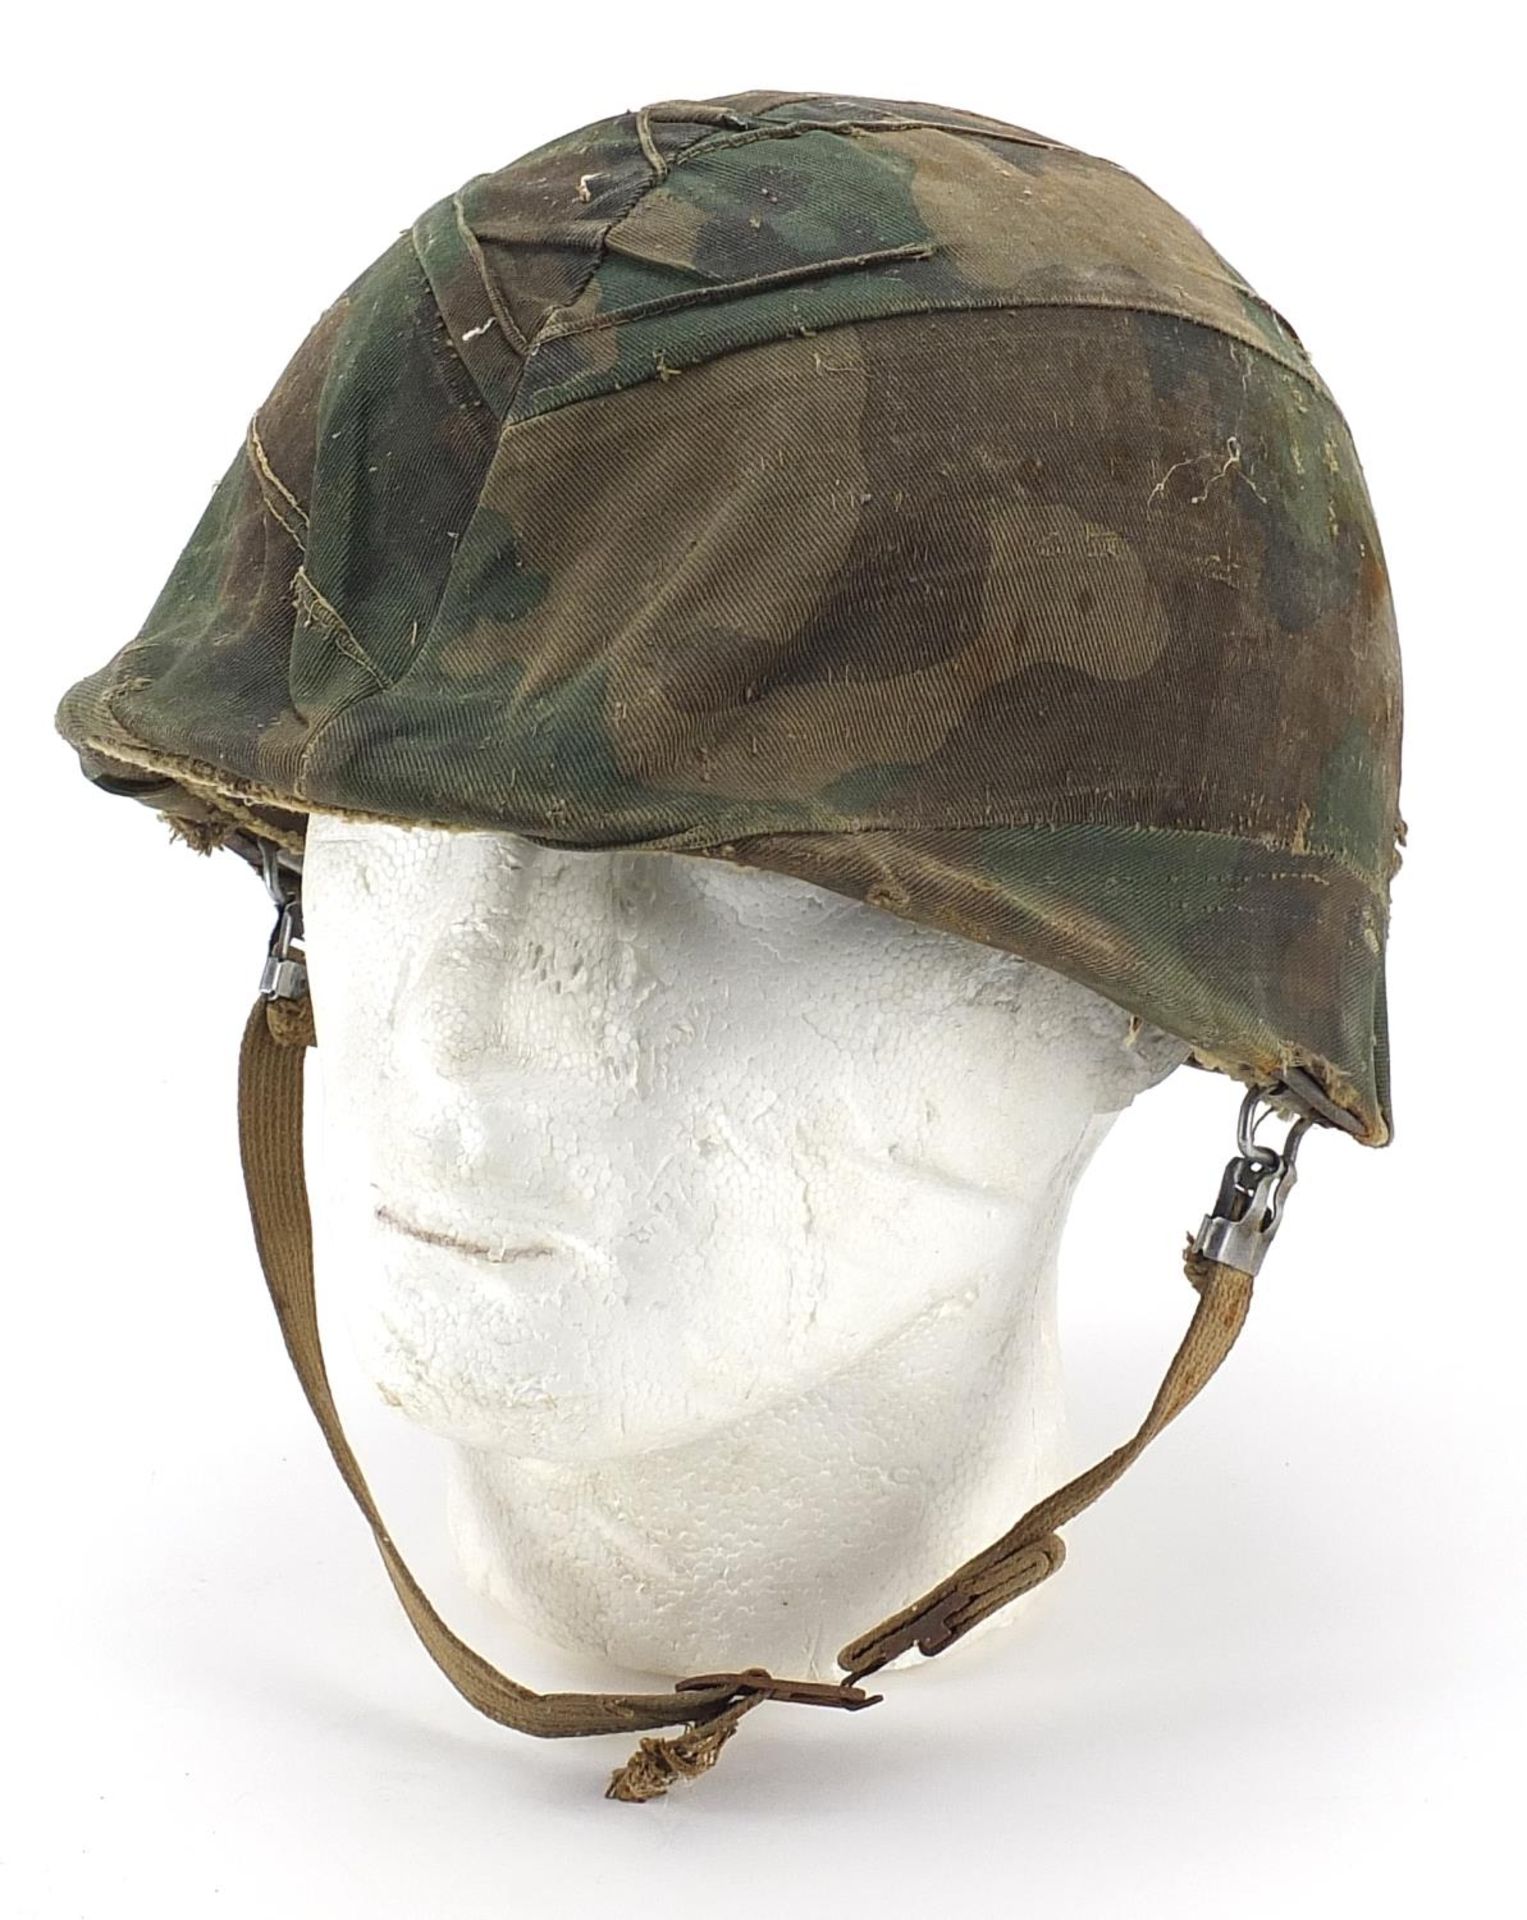 Military interest USM1 helmet with camouflage cover